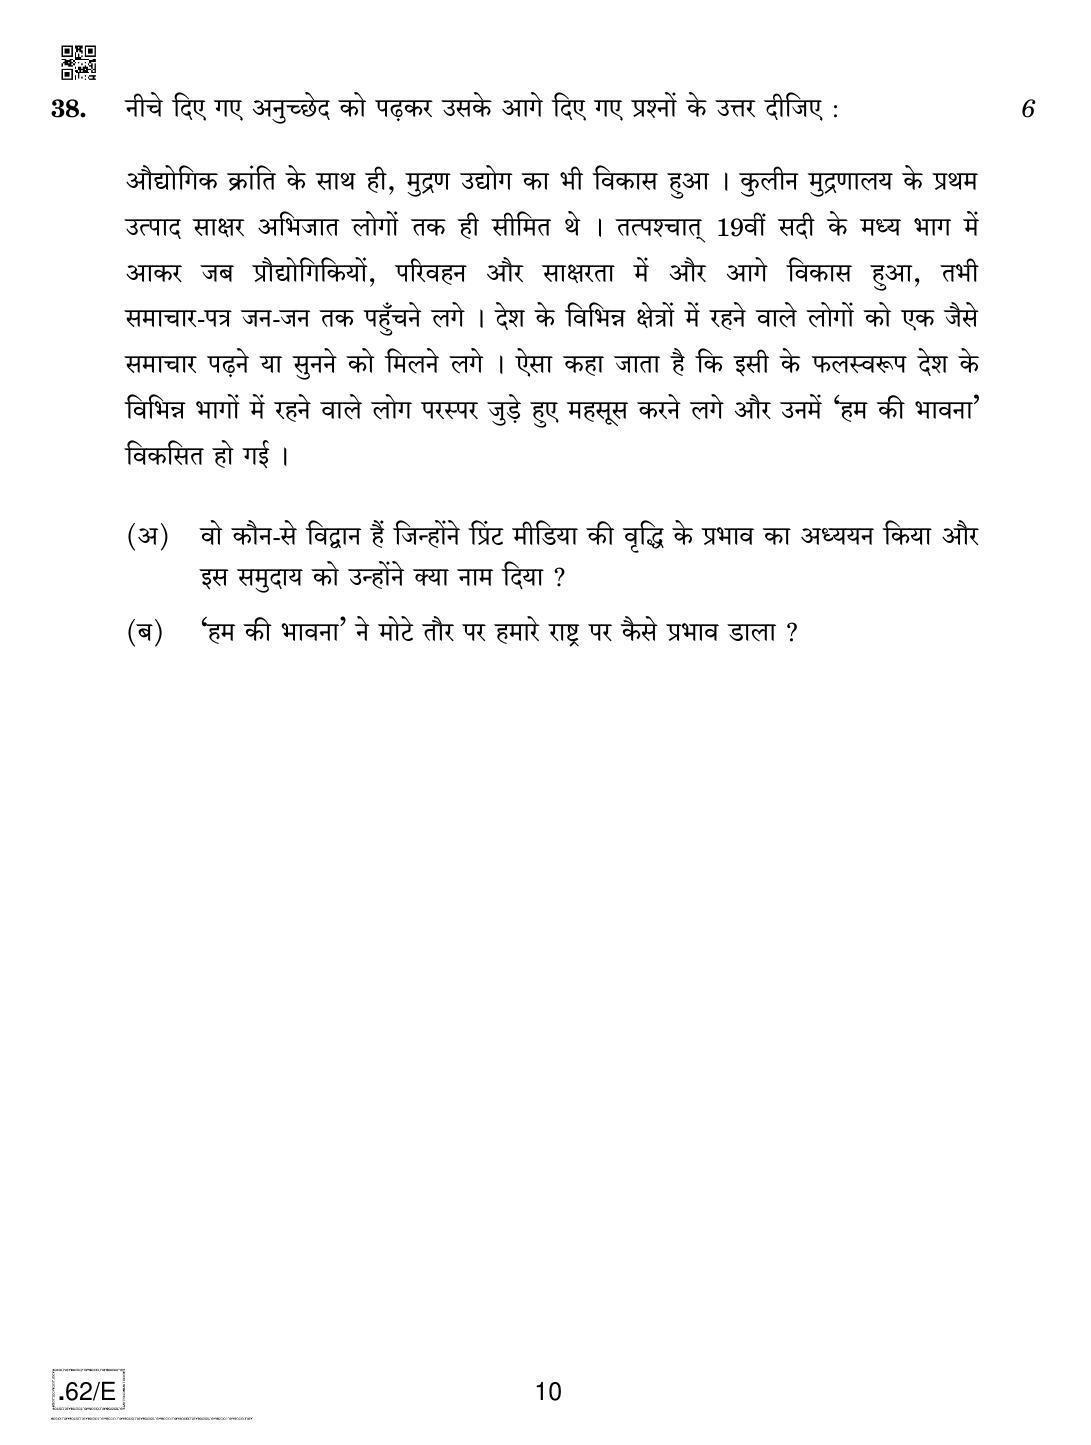 CBSE Class 12 Sociology 2020 Compartment Question Paper - Page 10